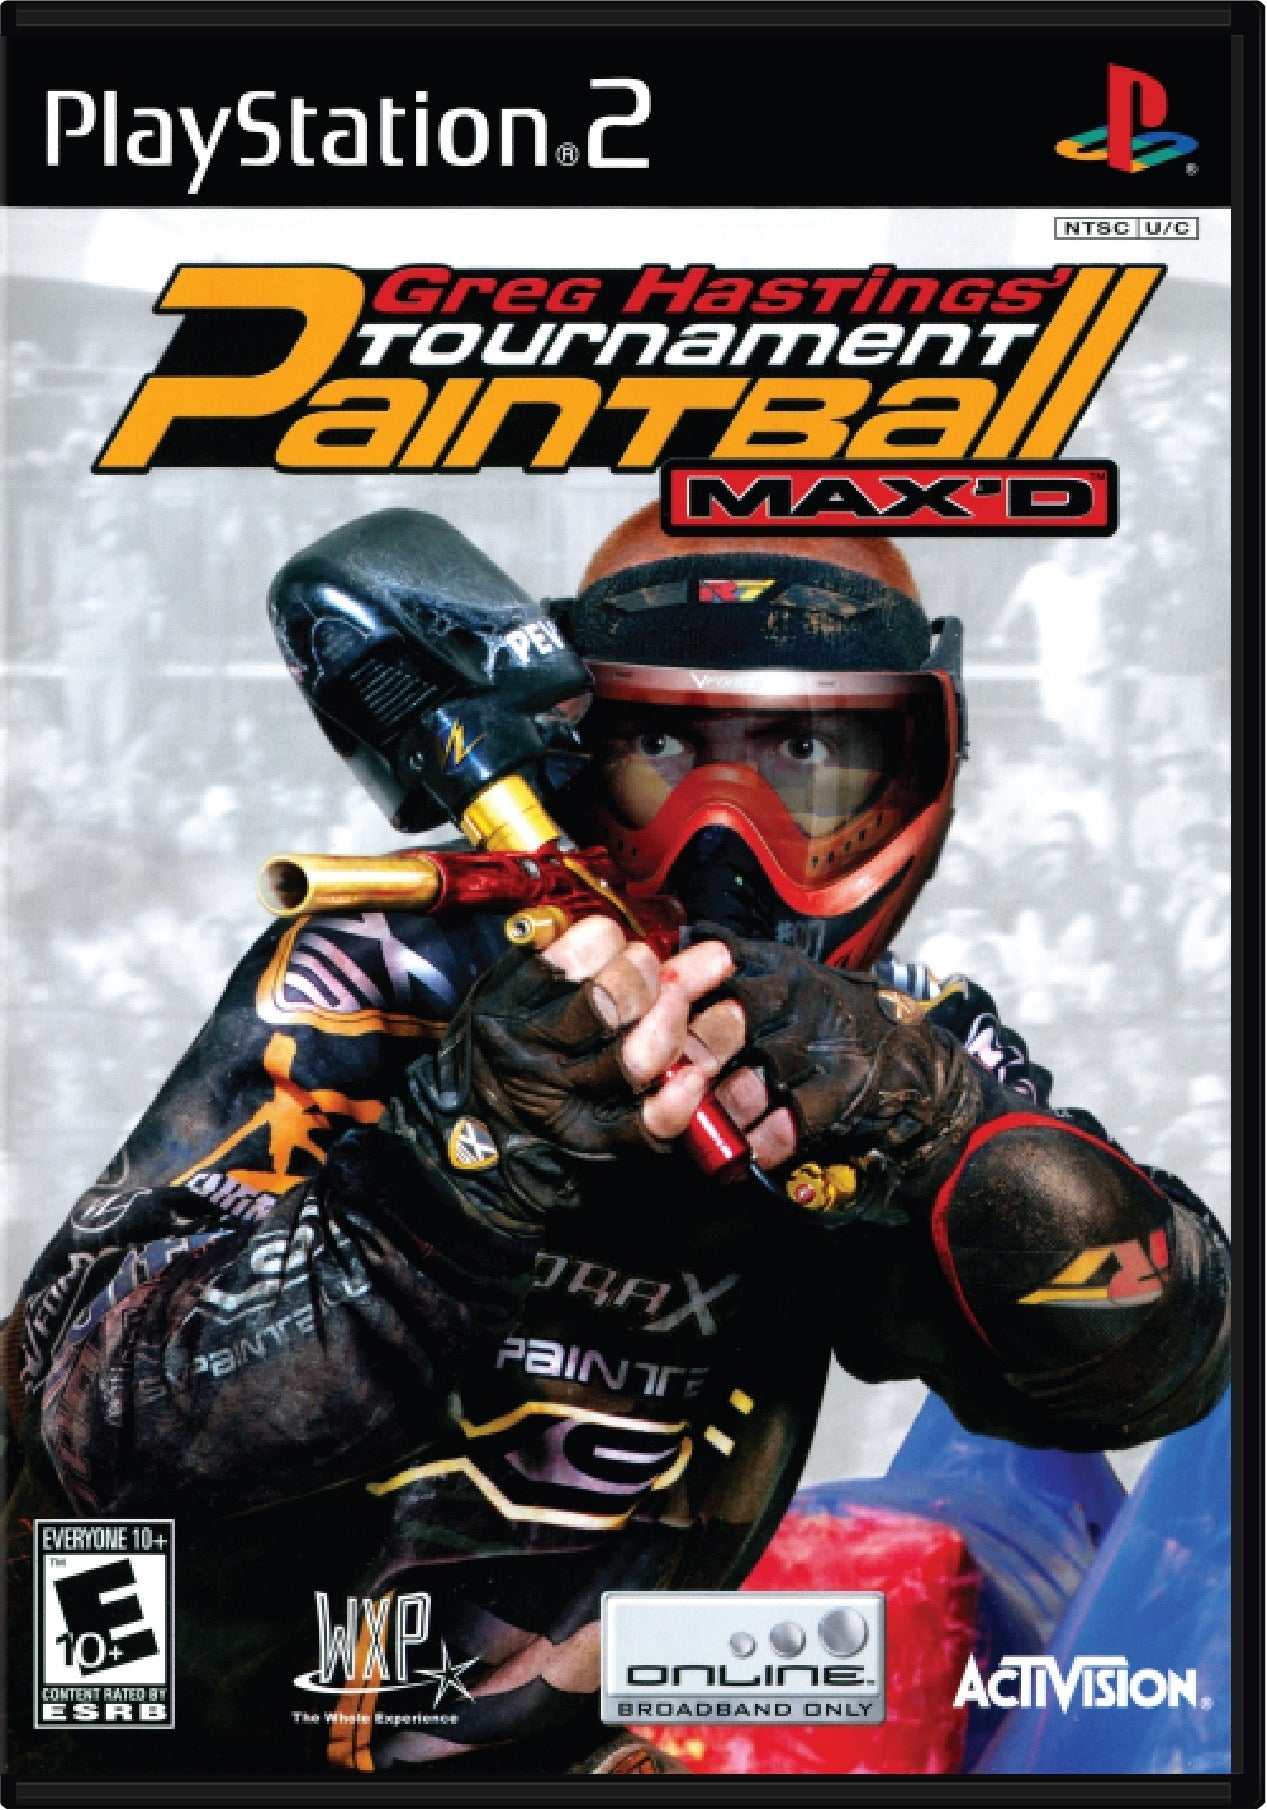 Greg Hastings Tournament Paintball Maxed Cover Art and Product Photo